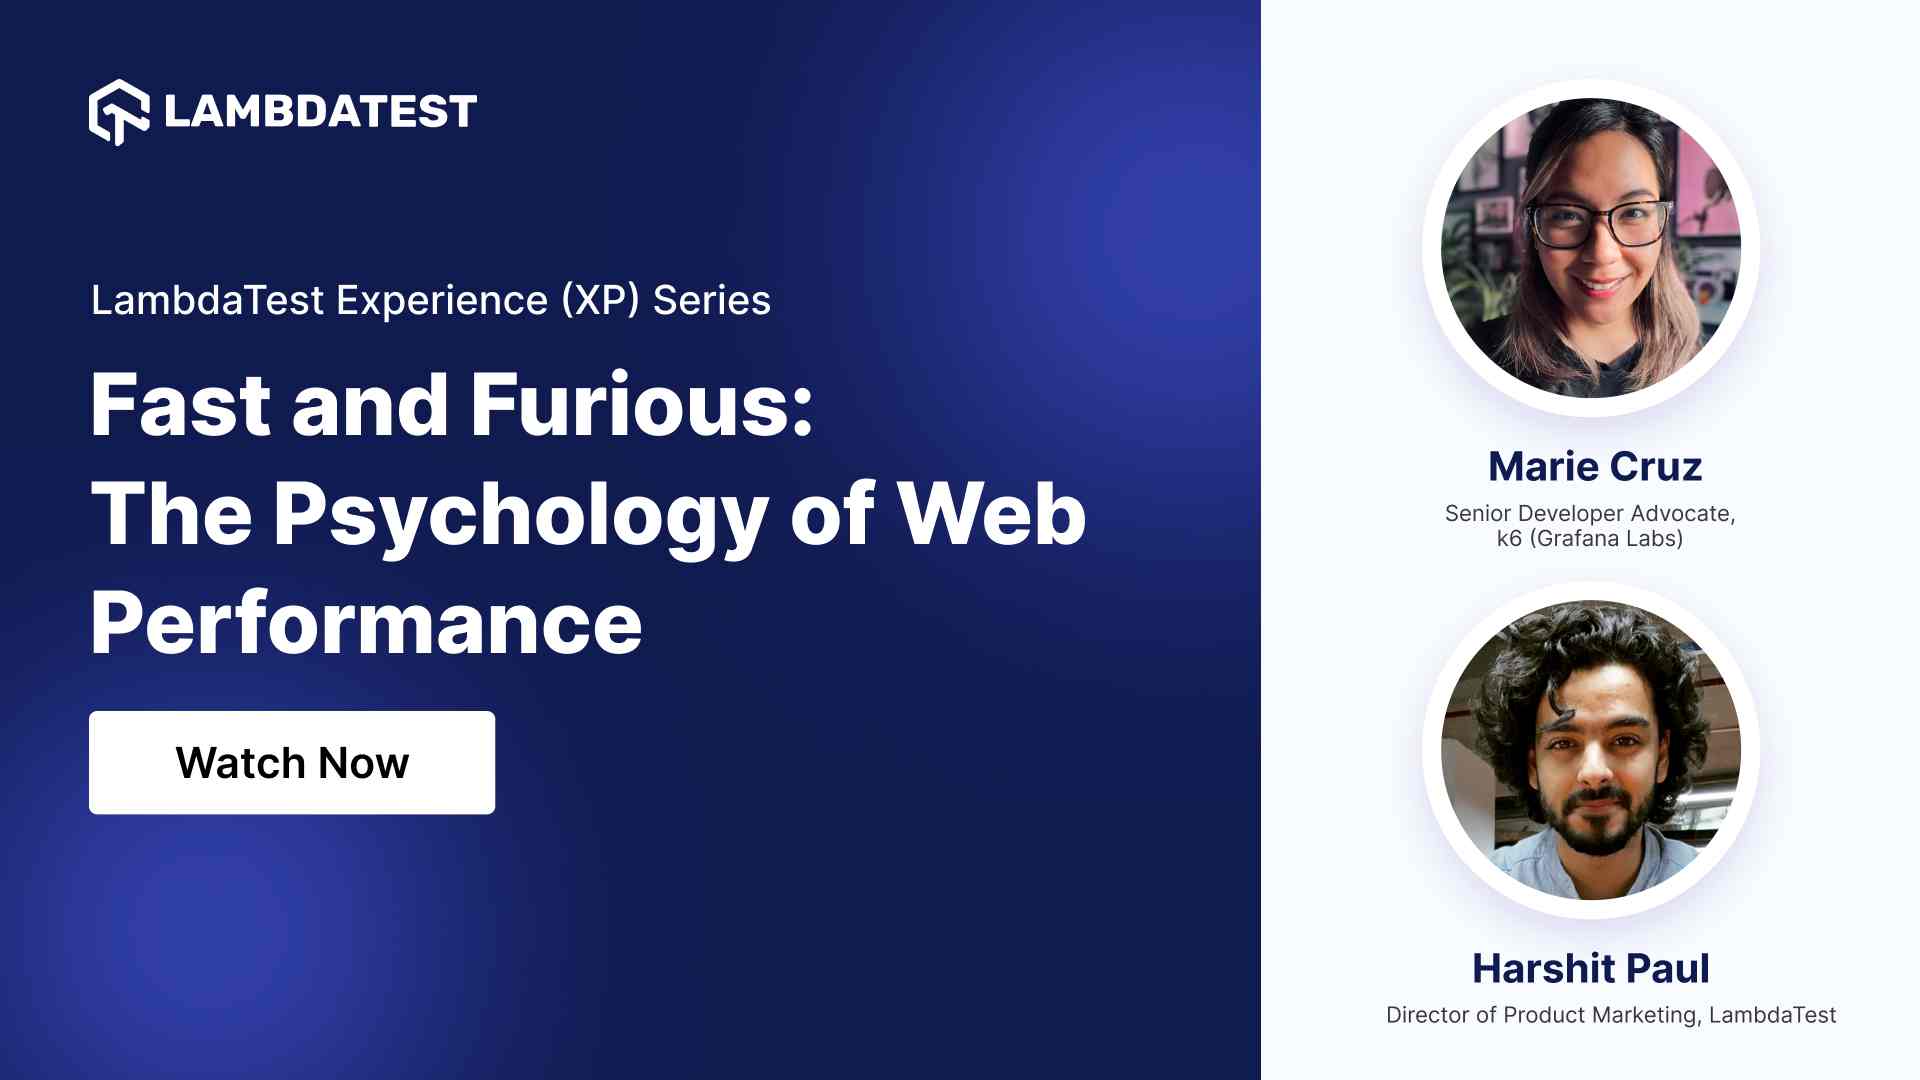 Fast and Furious: The Psychology of Web Performance